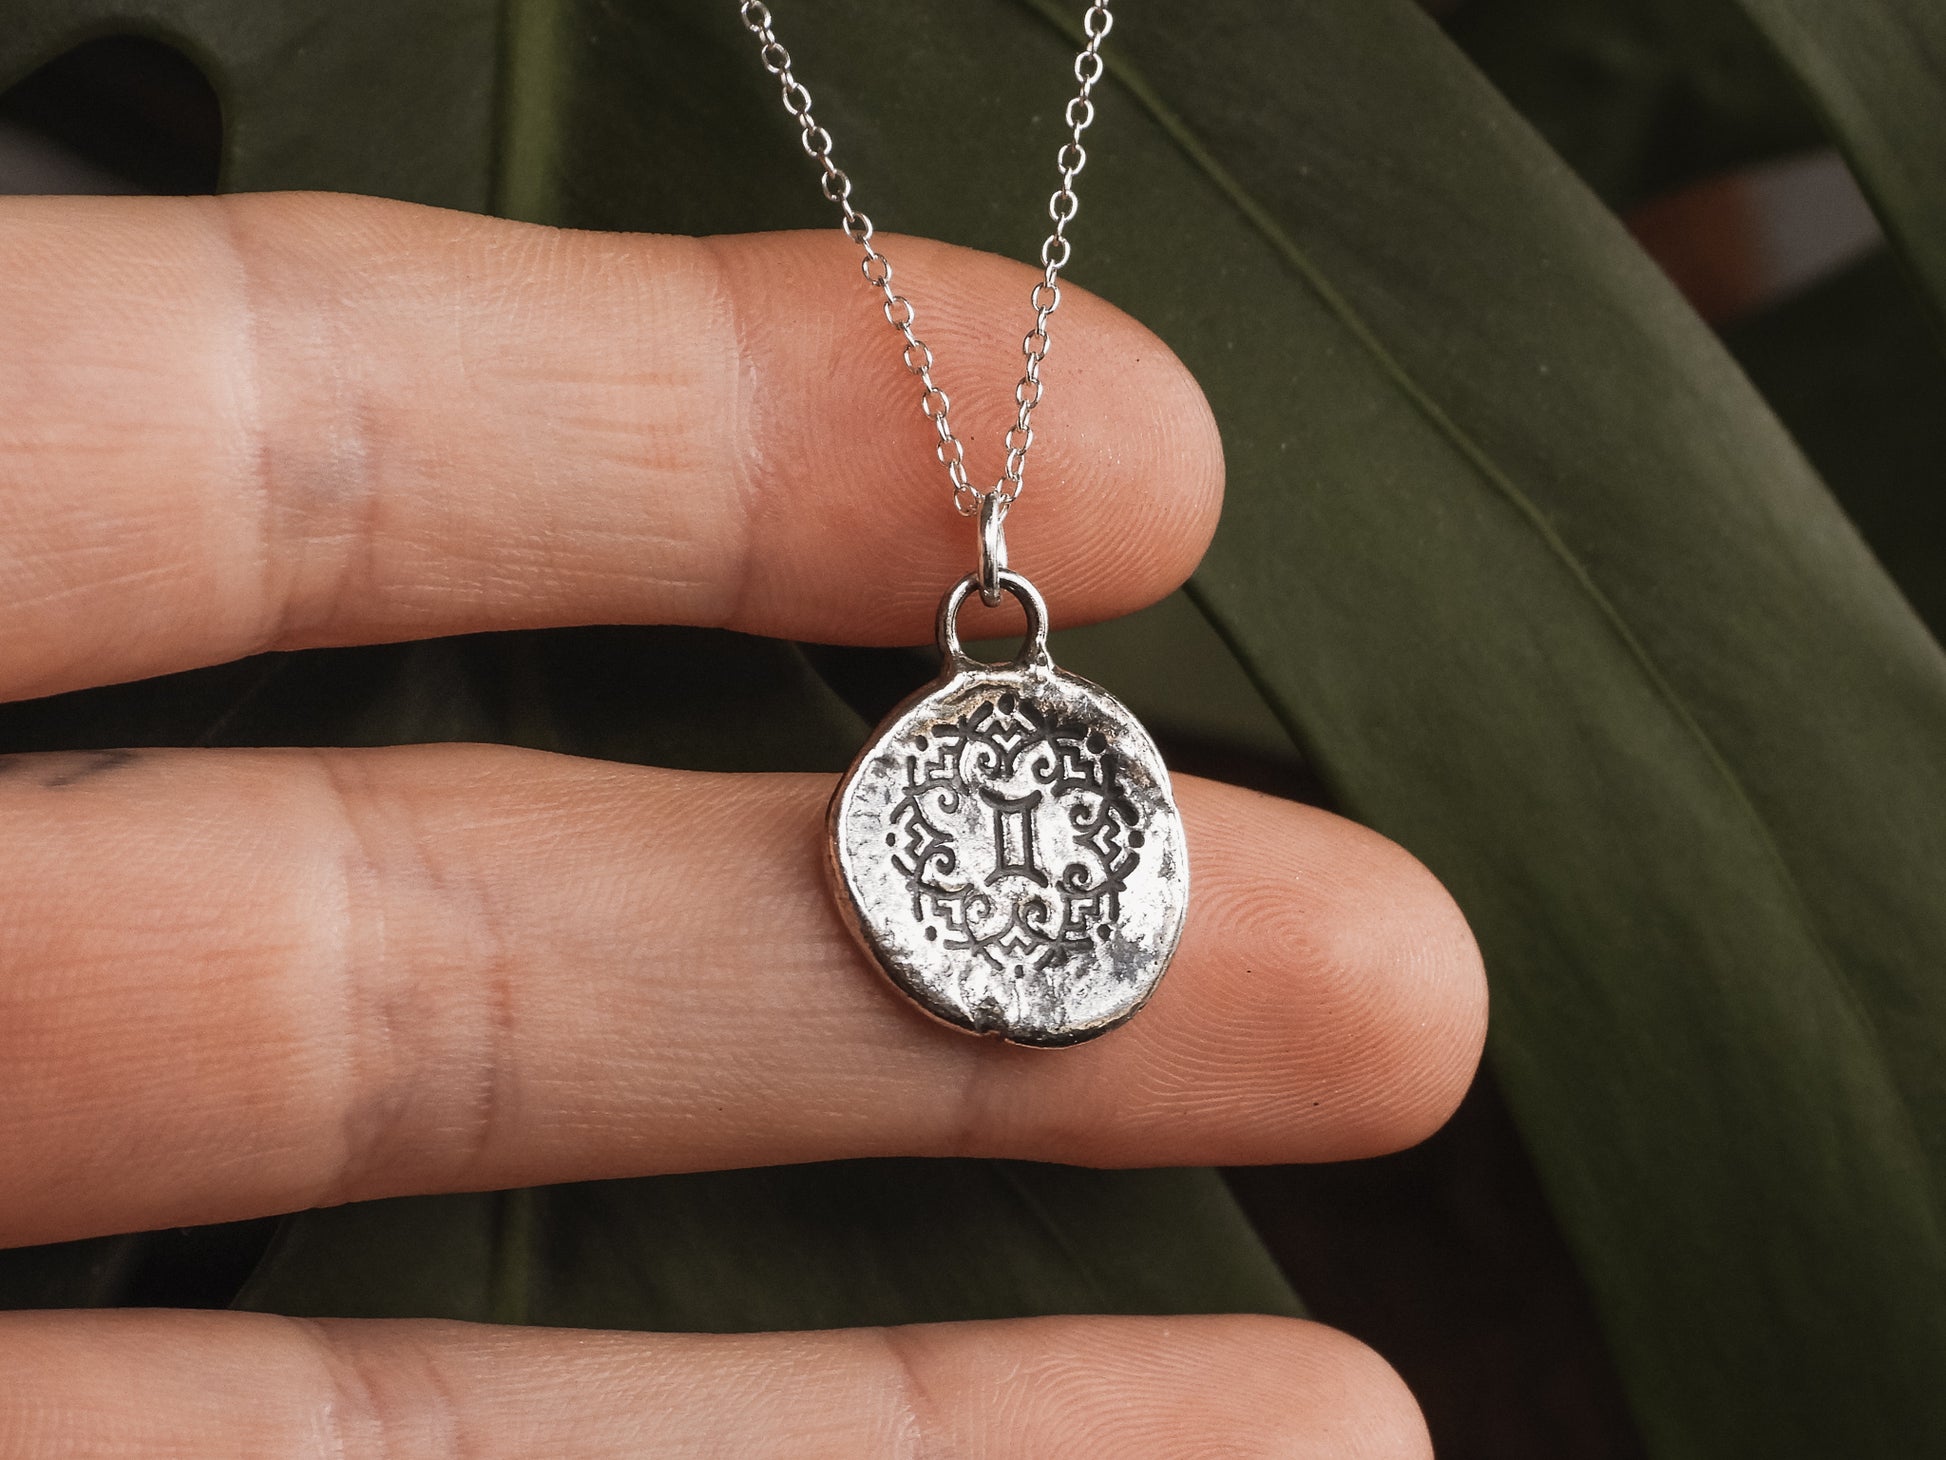 gemini mandala zodiac necklace made with recycled silver